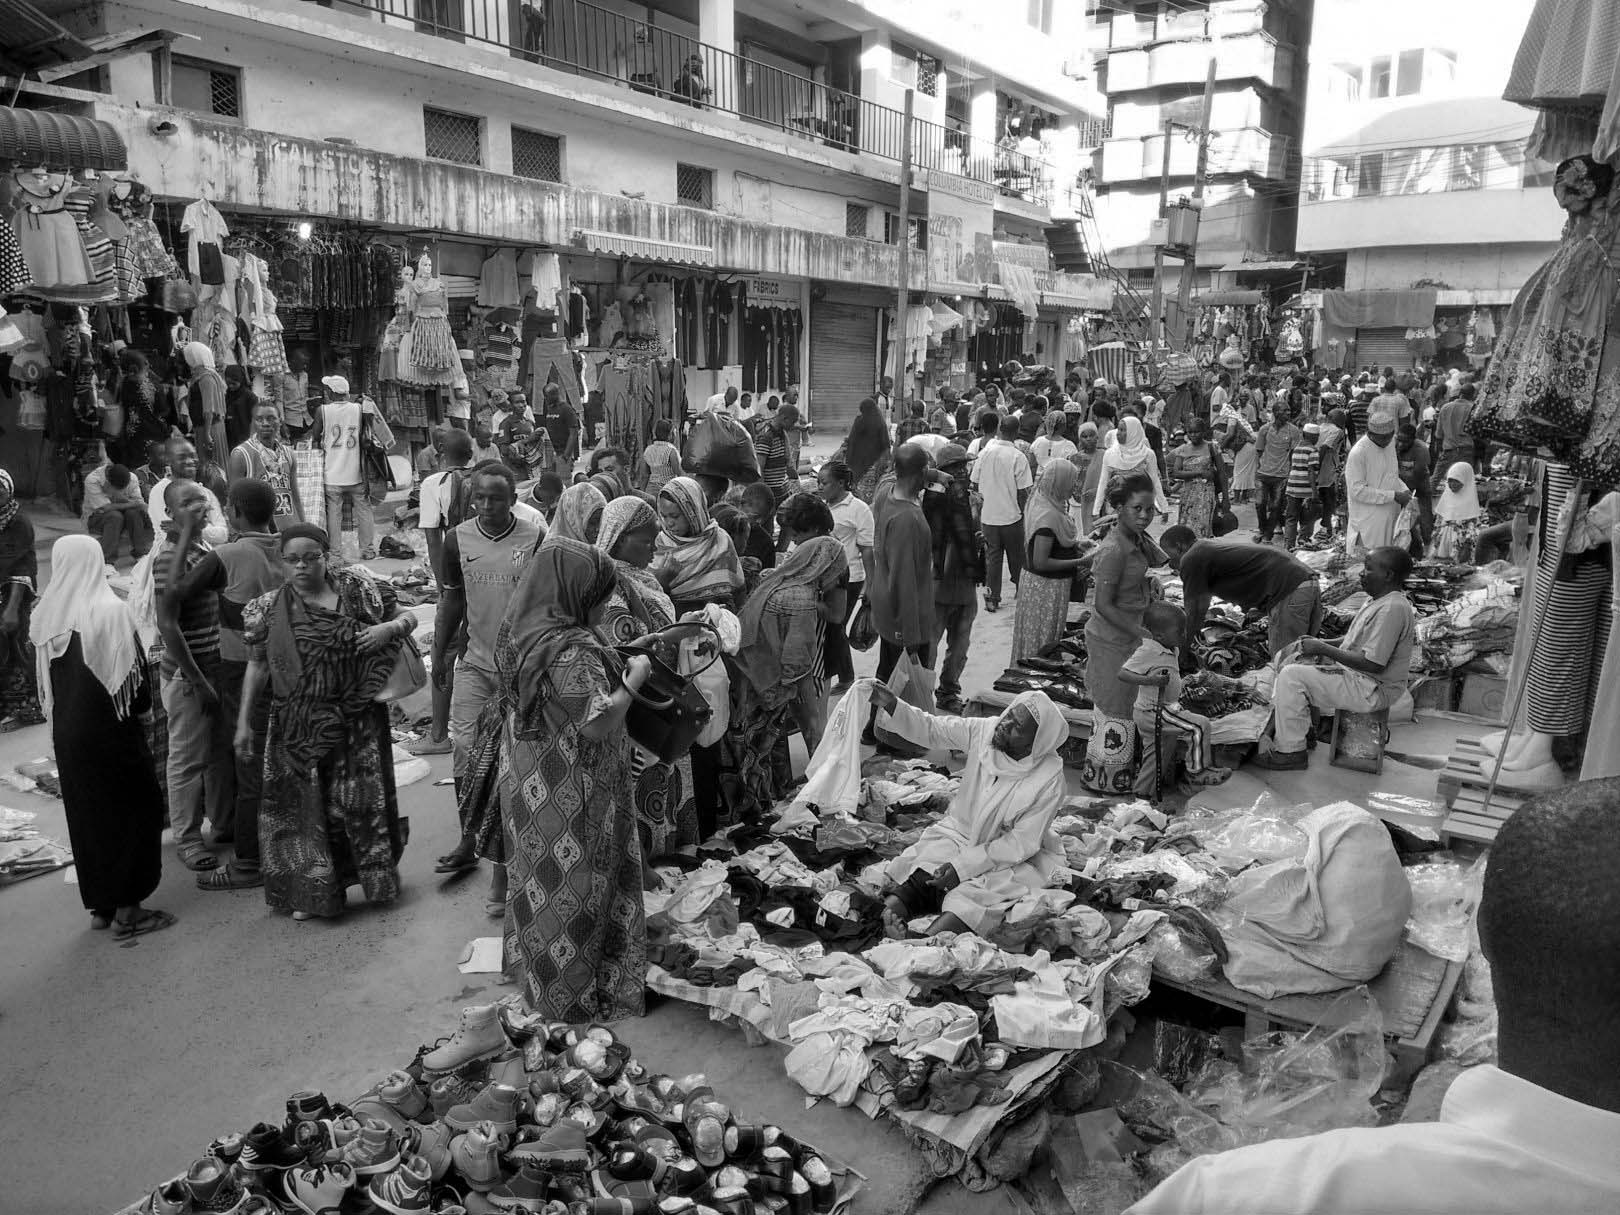 Vendors and a crowd of people trading outside the Kariakoo market building